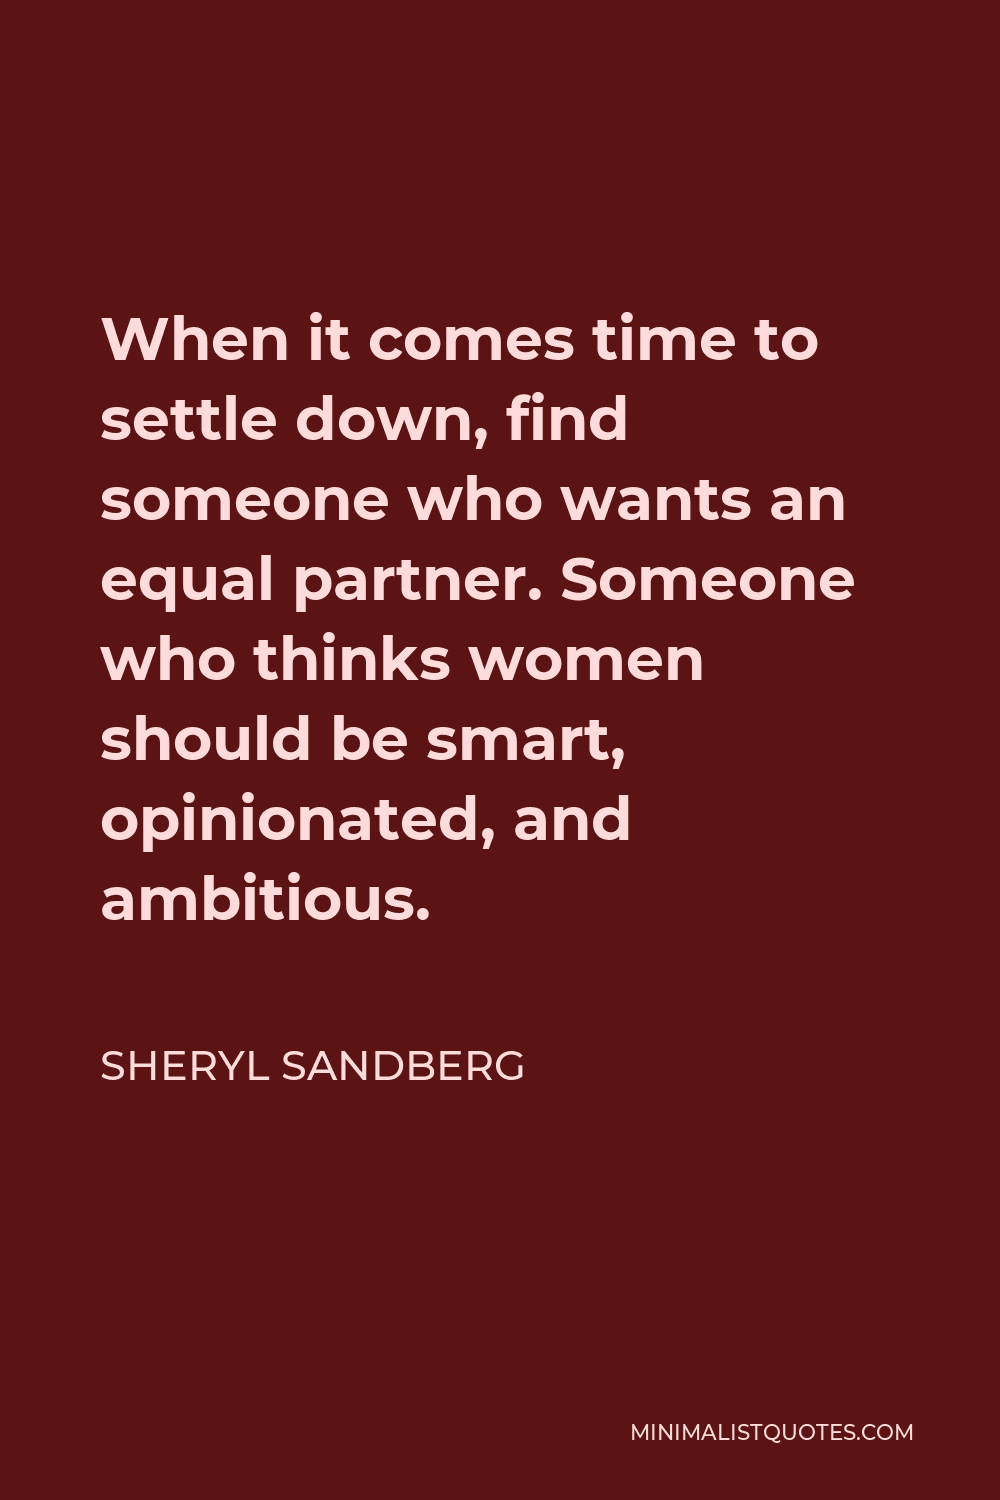 Sheryl Sandberg Quote - When it comes time to settle down, find someone who wants an equal partner. Someone who thinks women should be smart, opinionated, and ambitious.